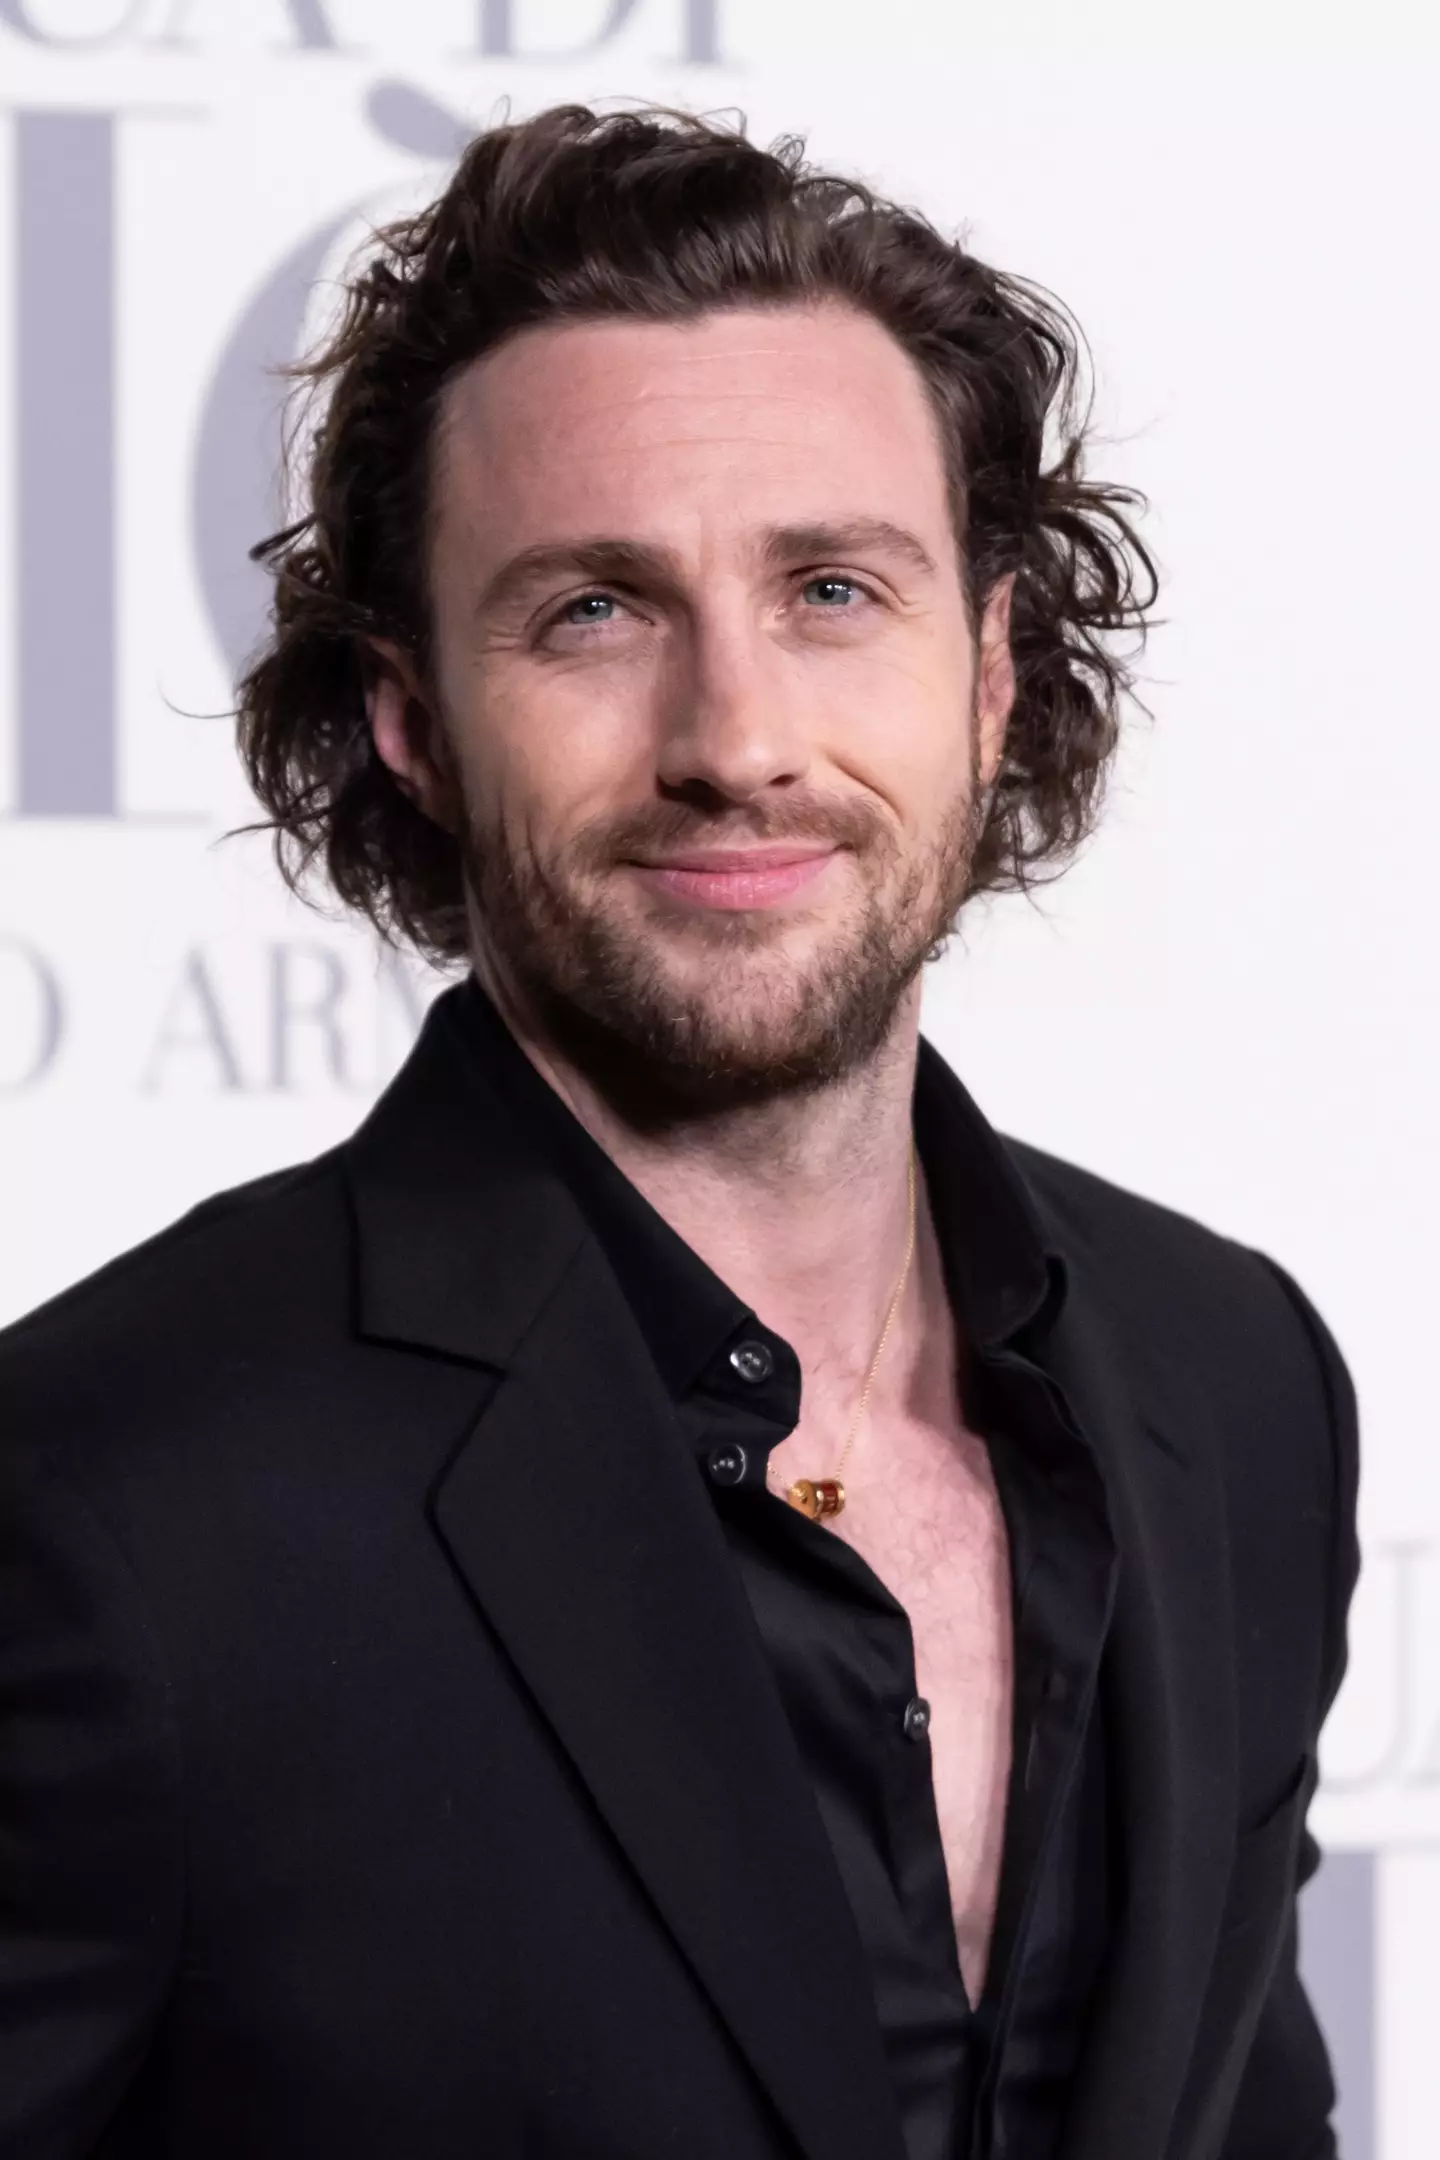 There was speculation that Aaron Taylor-Johnson would take the role.